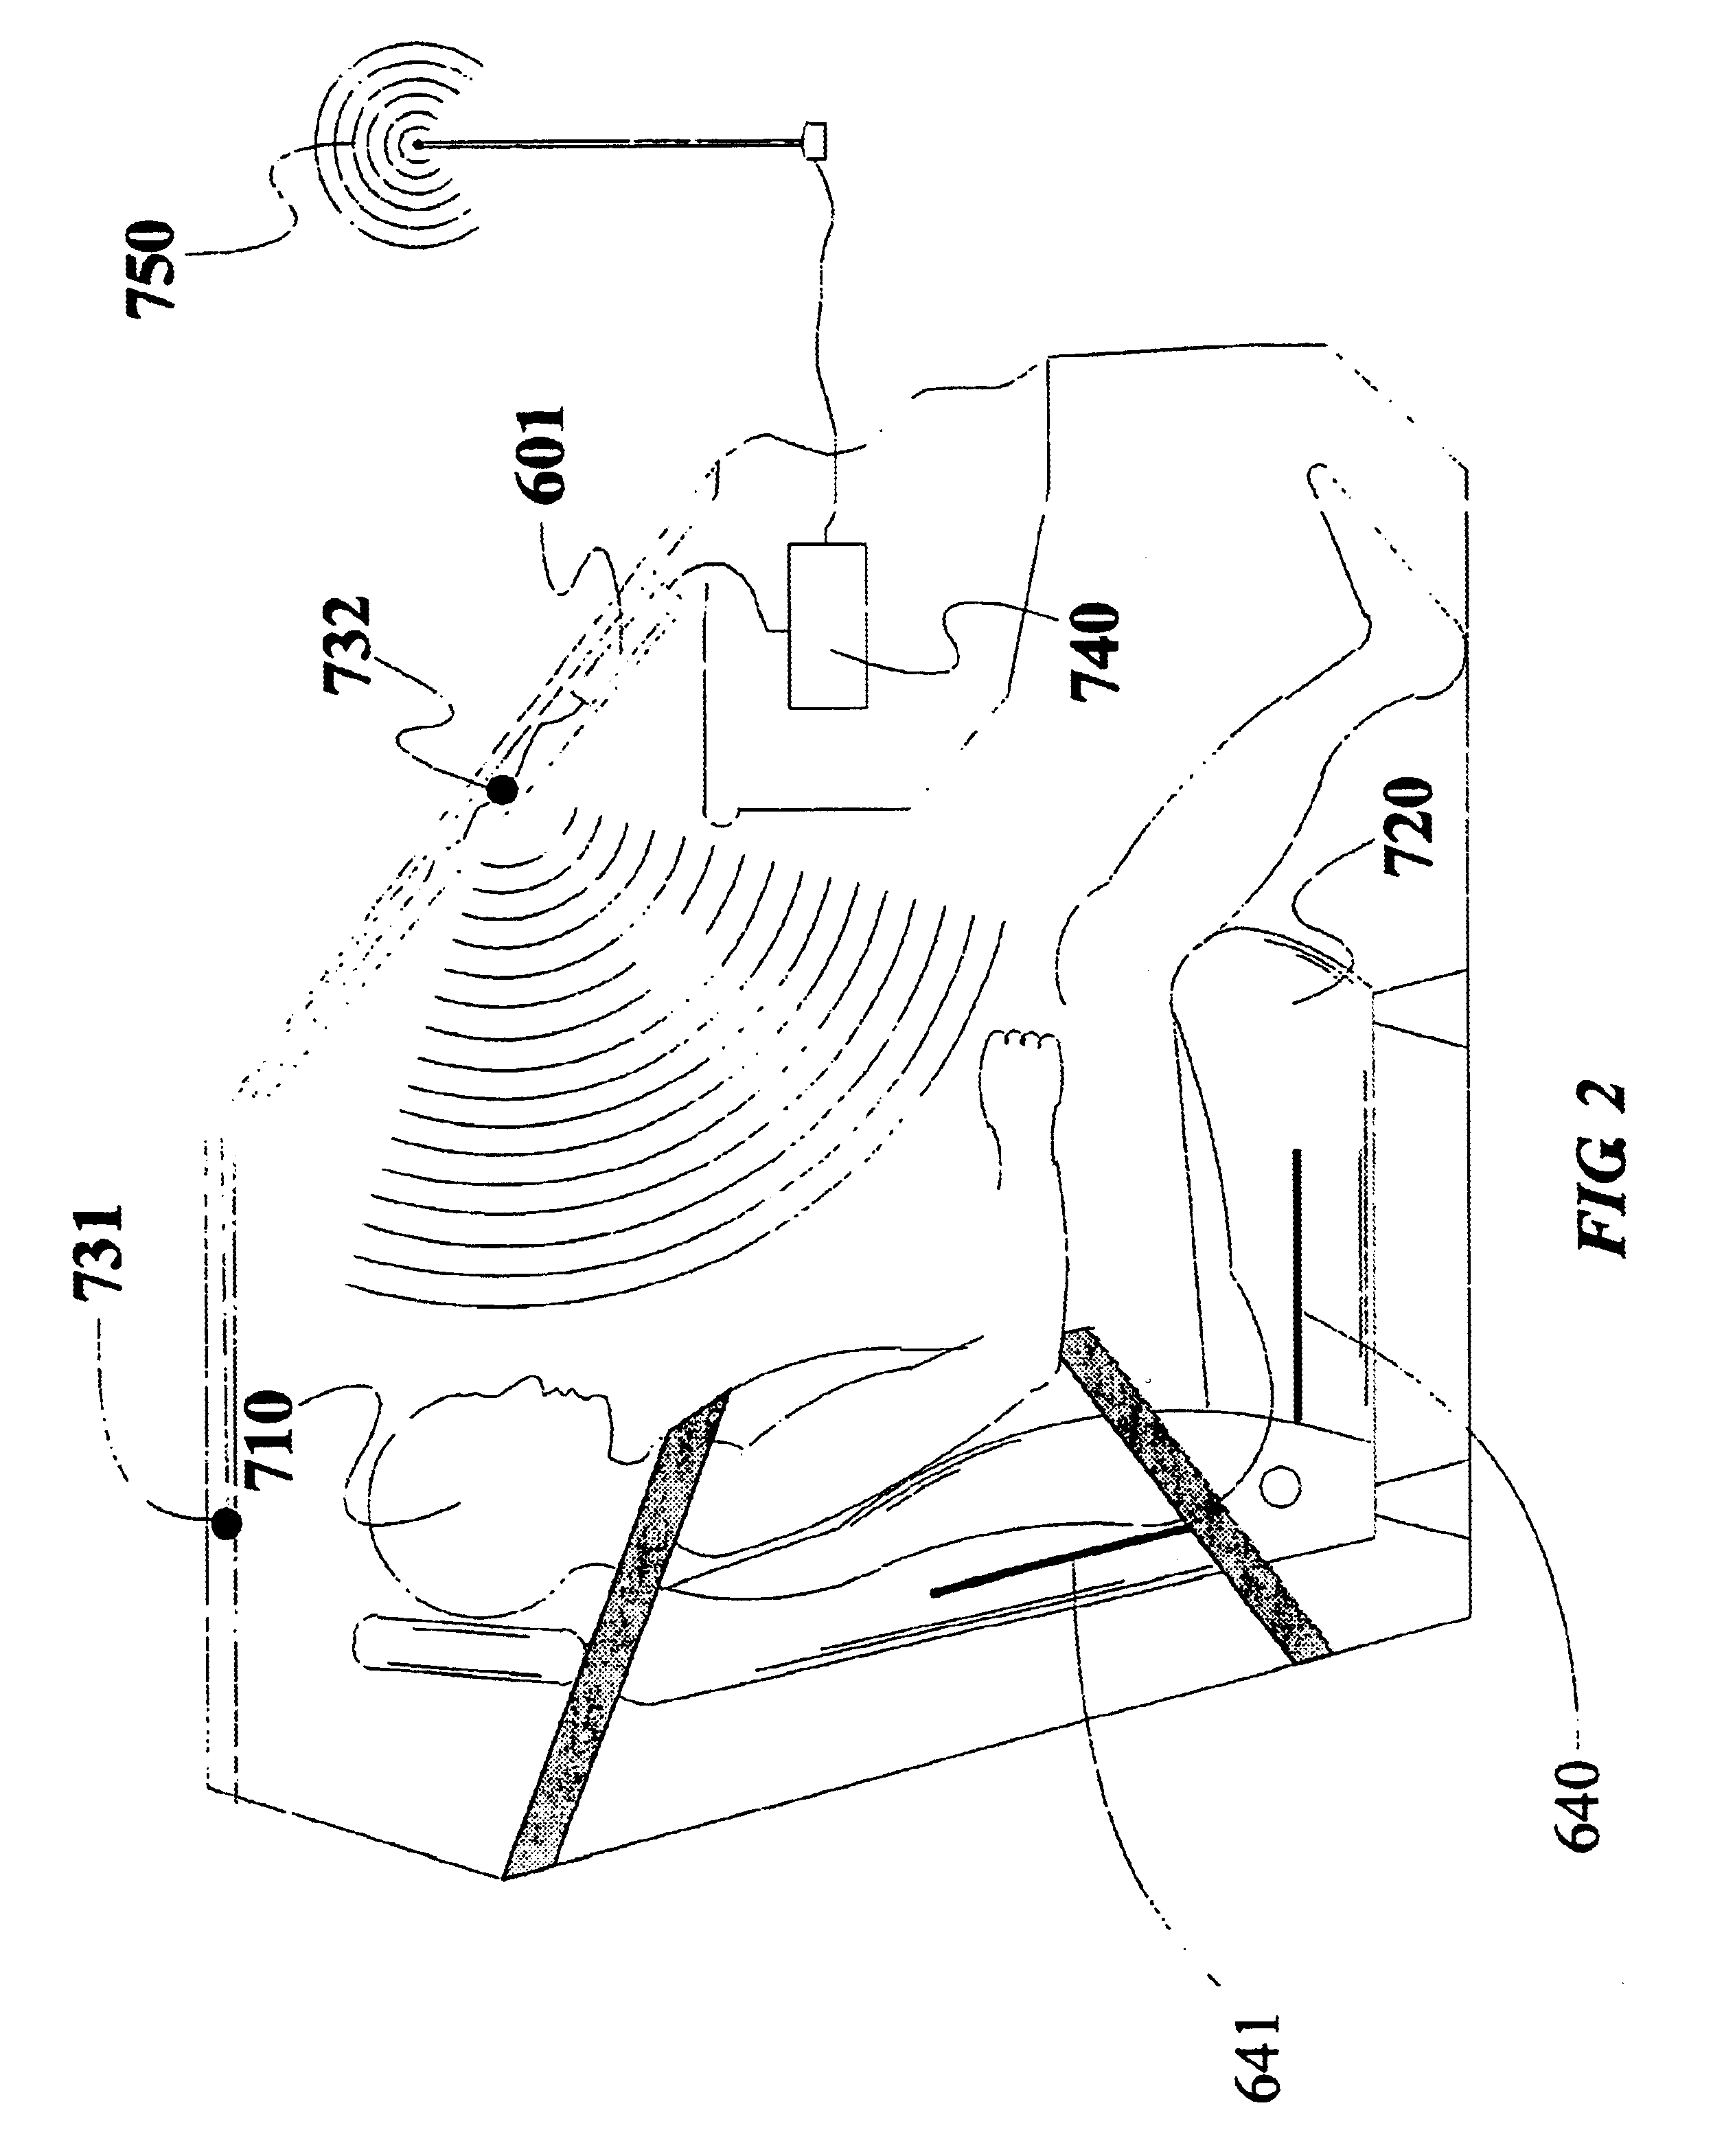 Method and apparatus for controlling a vehicular component